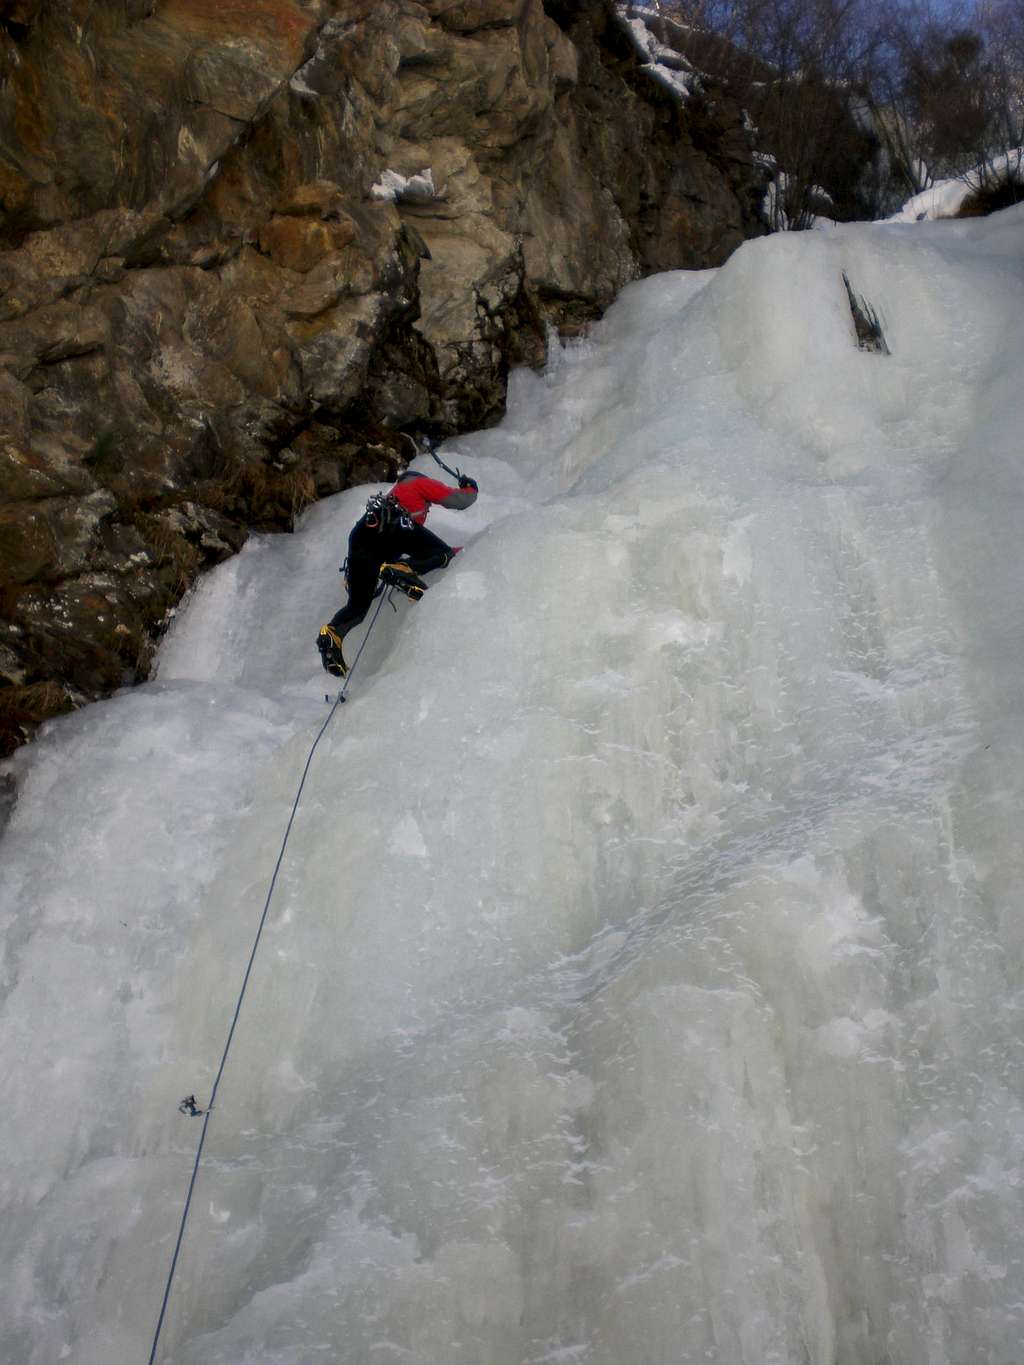 Milchtrinker Icefall